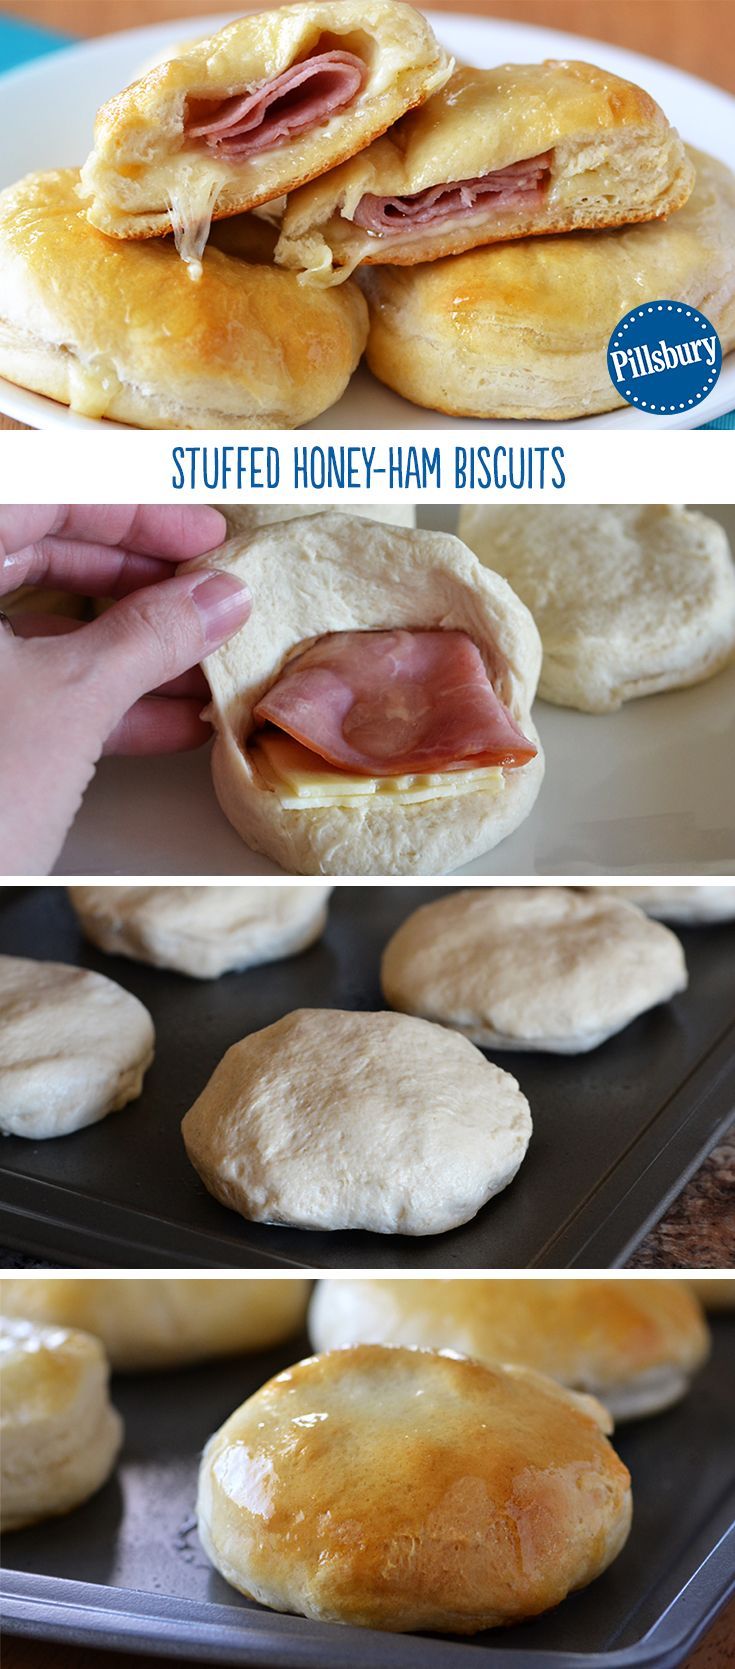 One of our top pinned recipes! These Stuffed Honey-Ham Biscuits are a simple dinner upgrade from the your  favorite sammie. You